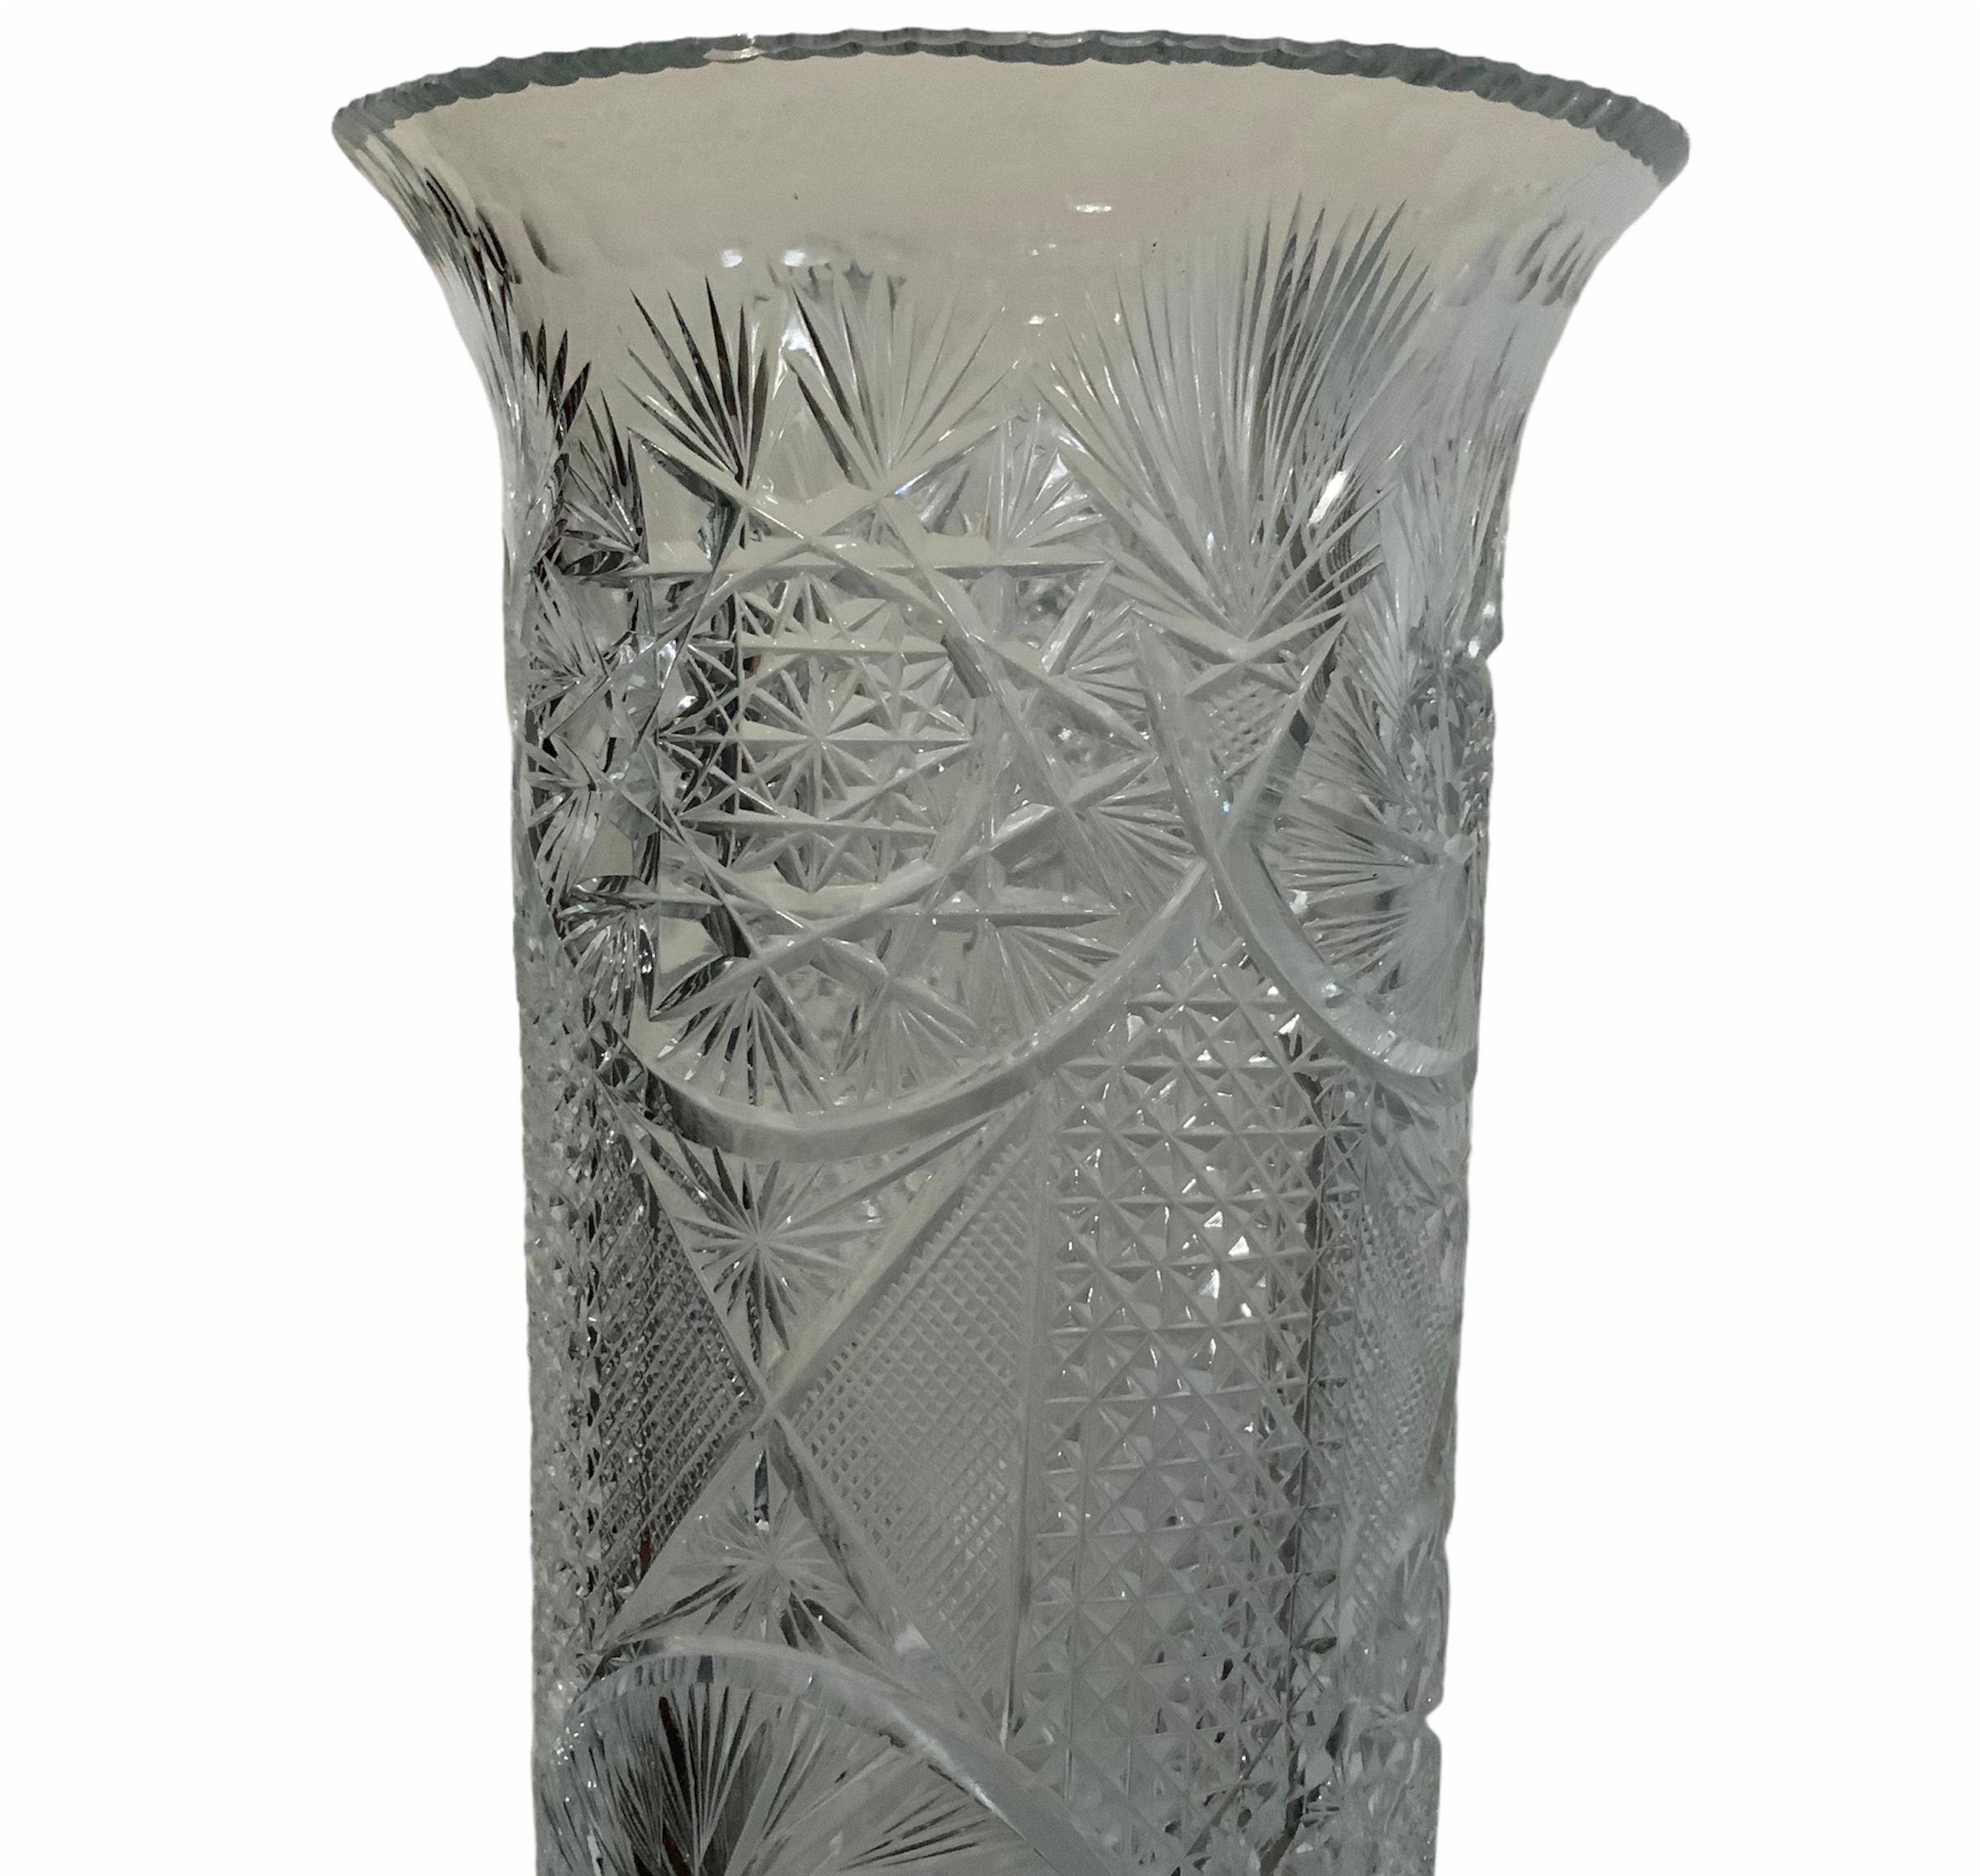 An American Brilliant cut clear glass large heavy umbrella/cane stand. It is cylindrical shaped and is adorned with different American Brilliant Glass motifs like large hobstars, buzz, stars, strawberry pattern, etc.